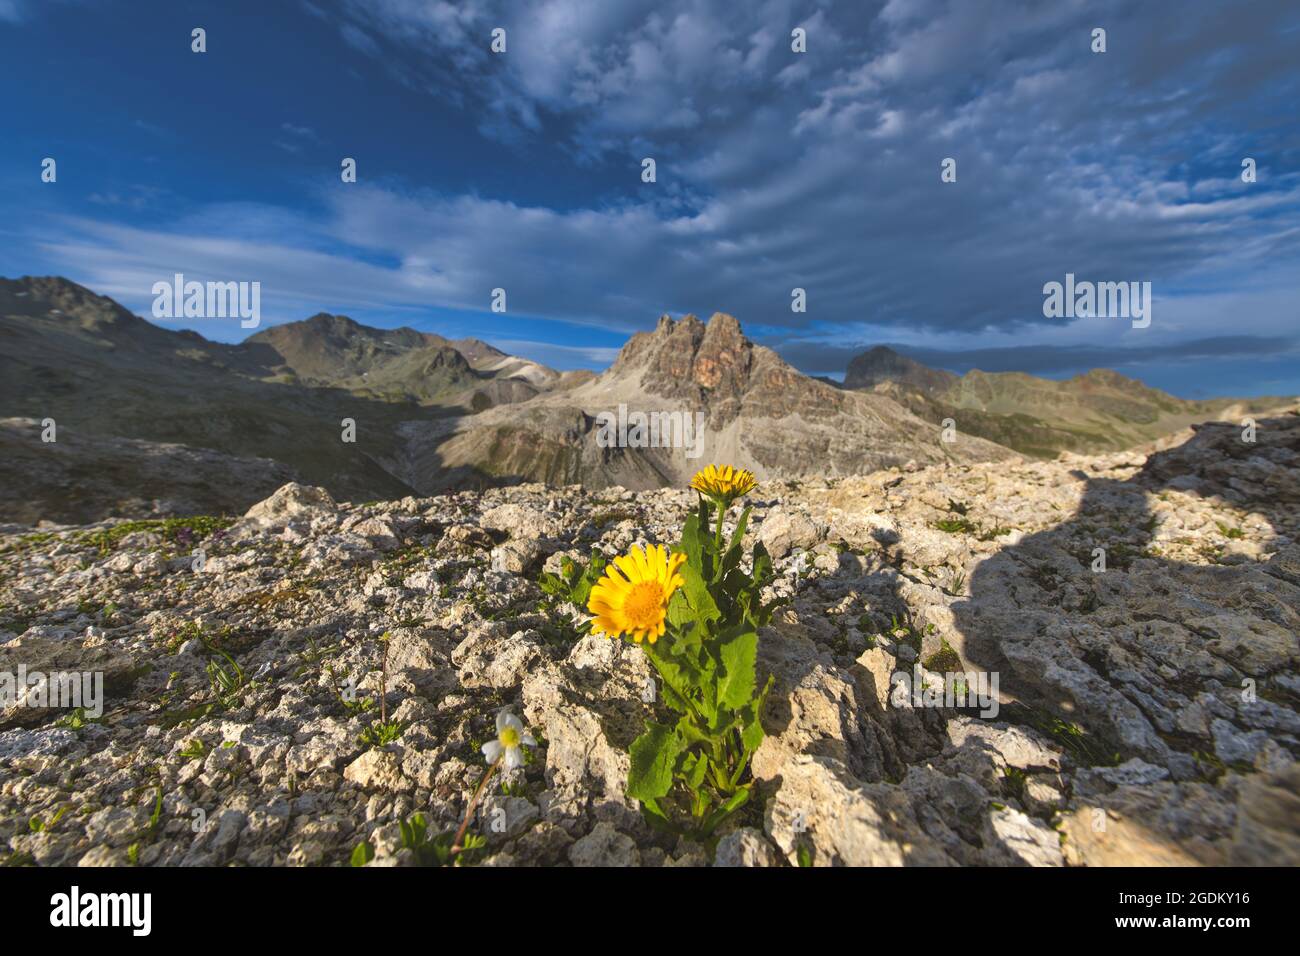 Flowers sprouting among the mountain rocks at high altitude Stock Photo